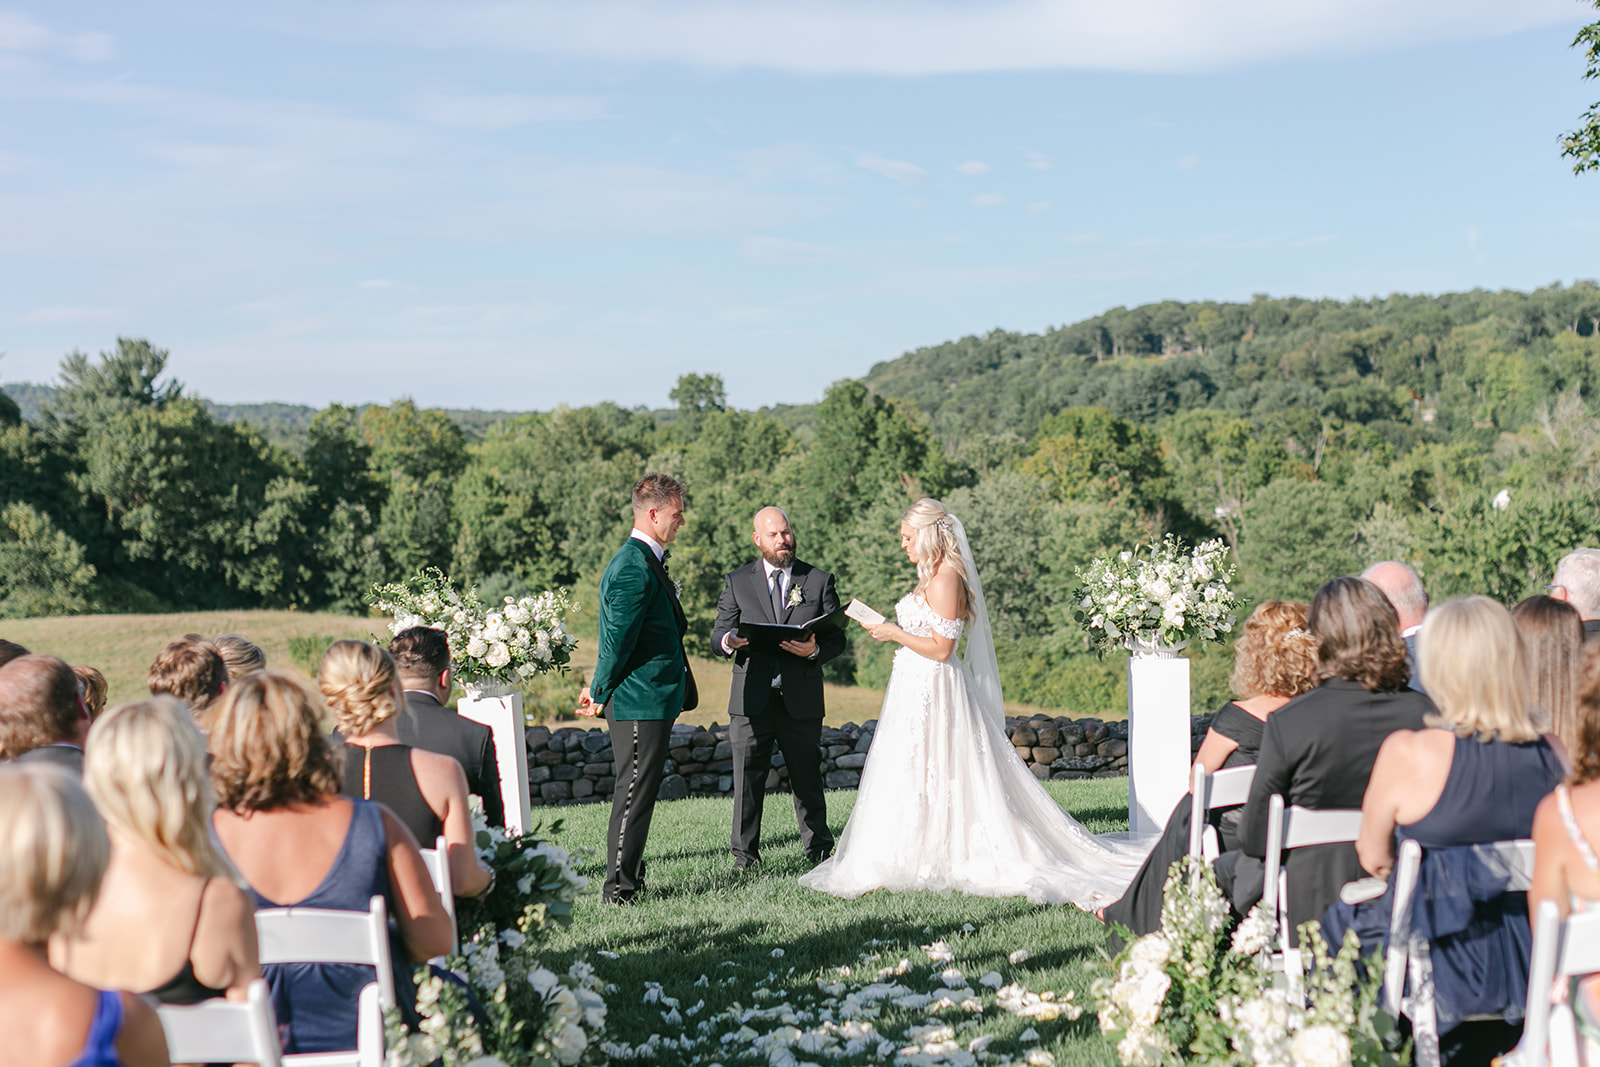 Bride and groom exchanging vows at hillstead museum wedding ceremony